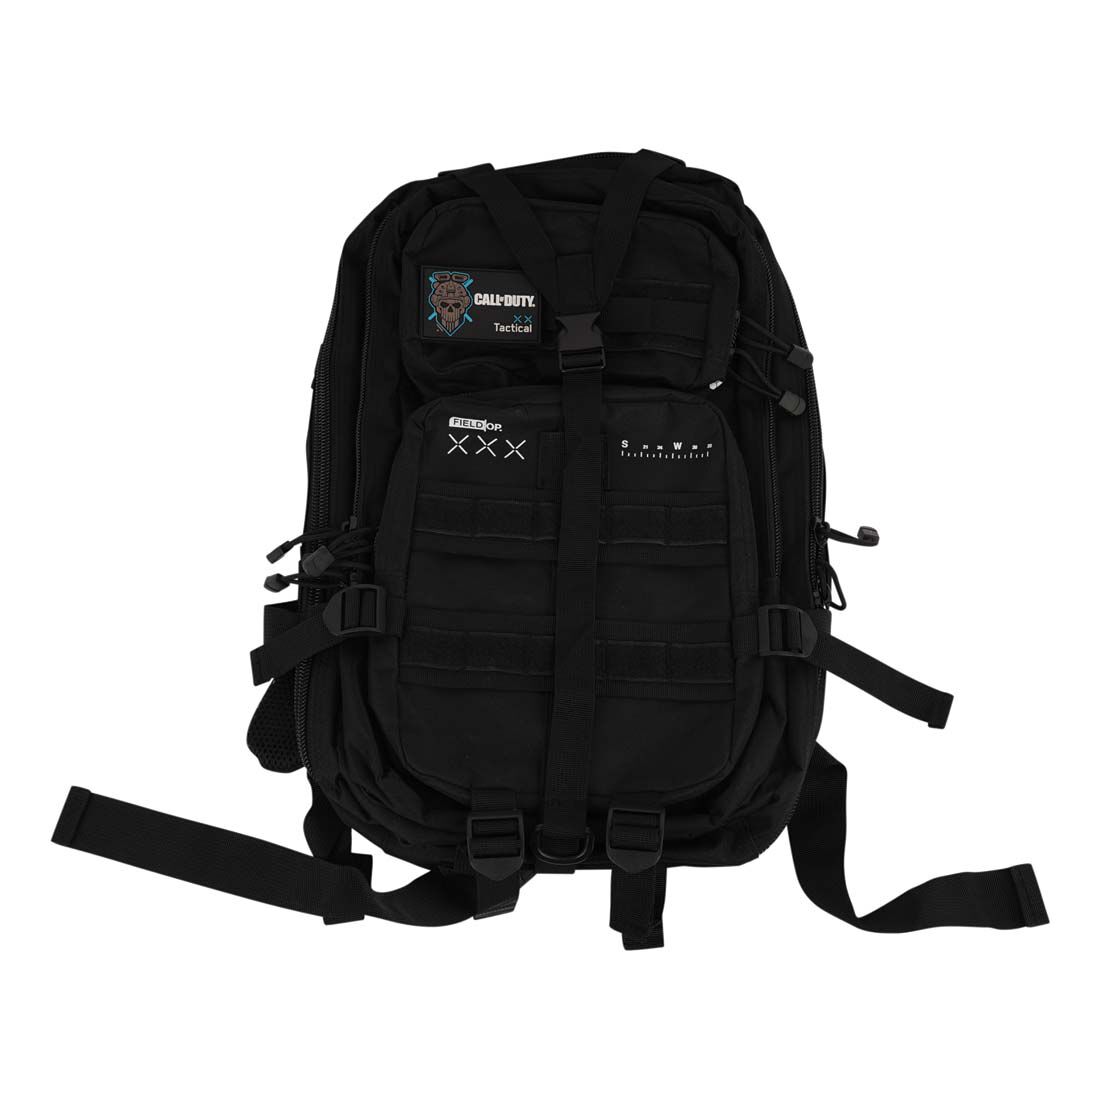 Call of Duty Tactical Back Pack